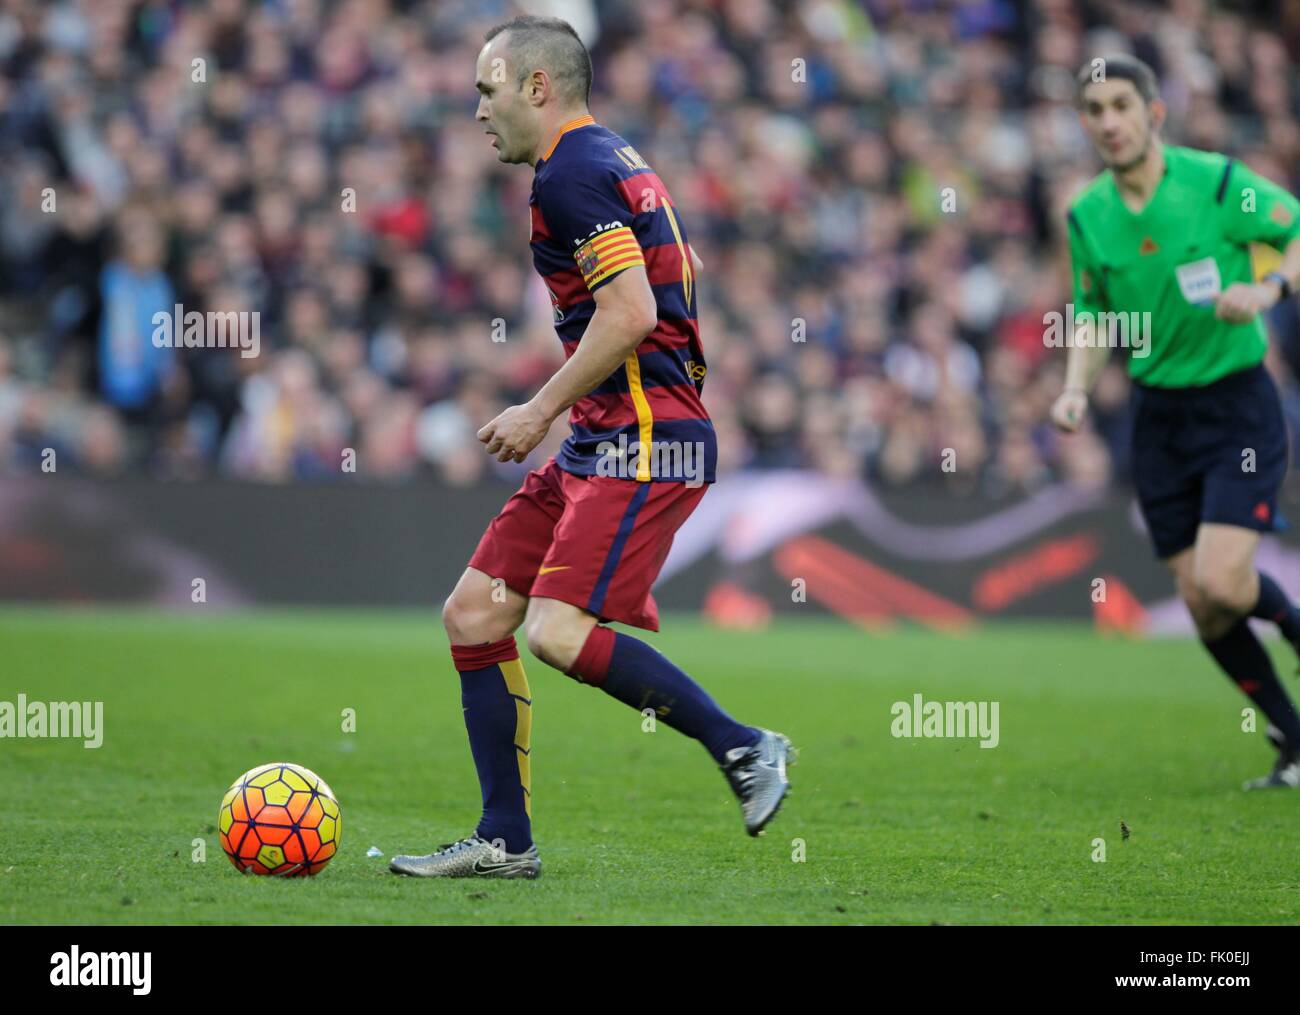 Andres Iniesta in action during the La Liga match FC Barcelona - Atlético Madrid January 30, 2016 at the Camp Nou,, Barcelona, Stock Photo